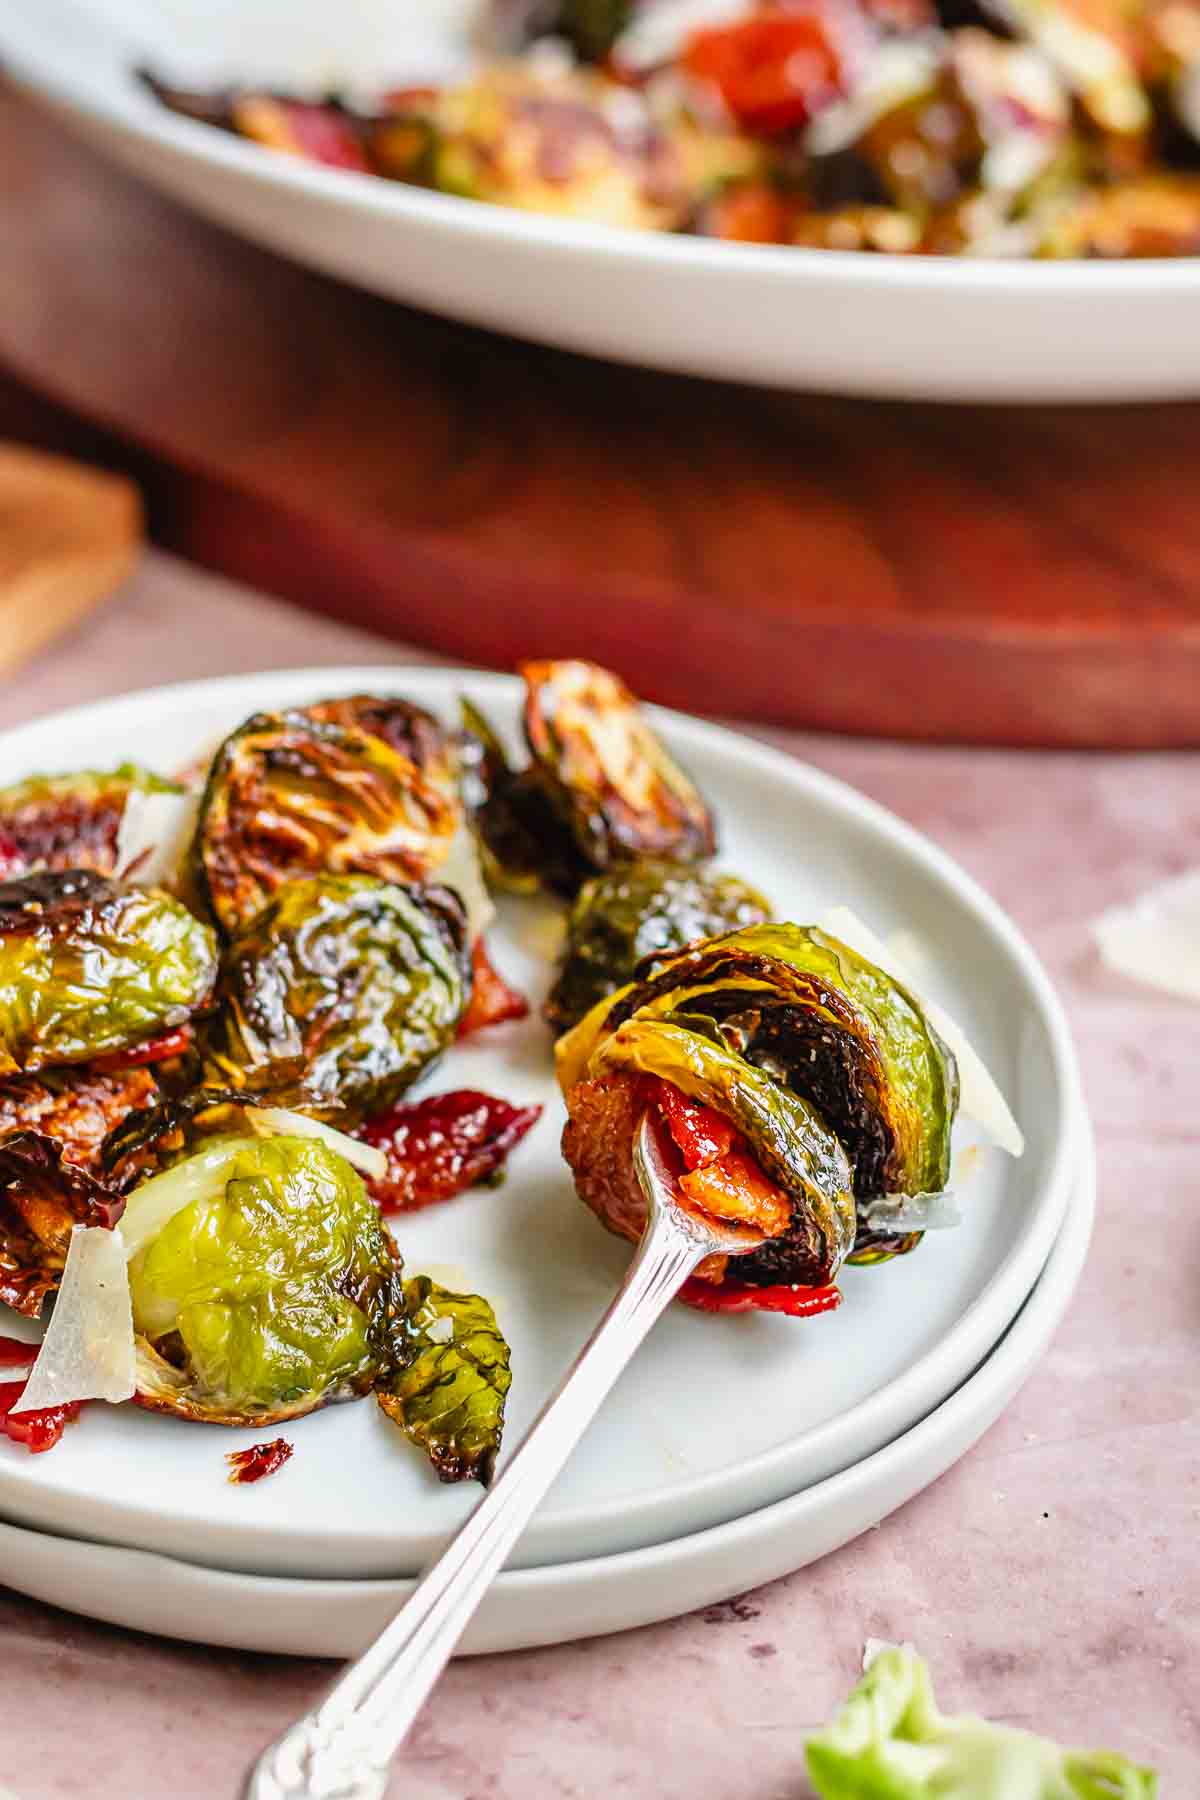 Maple bacon brussels sprouts speared on a fork.